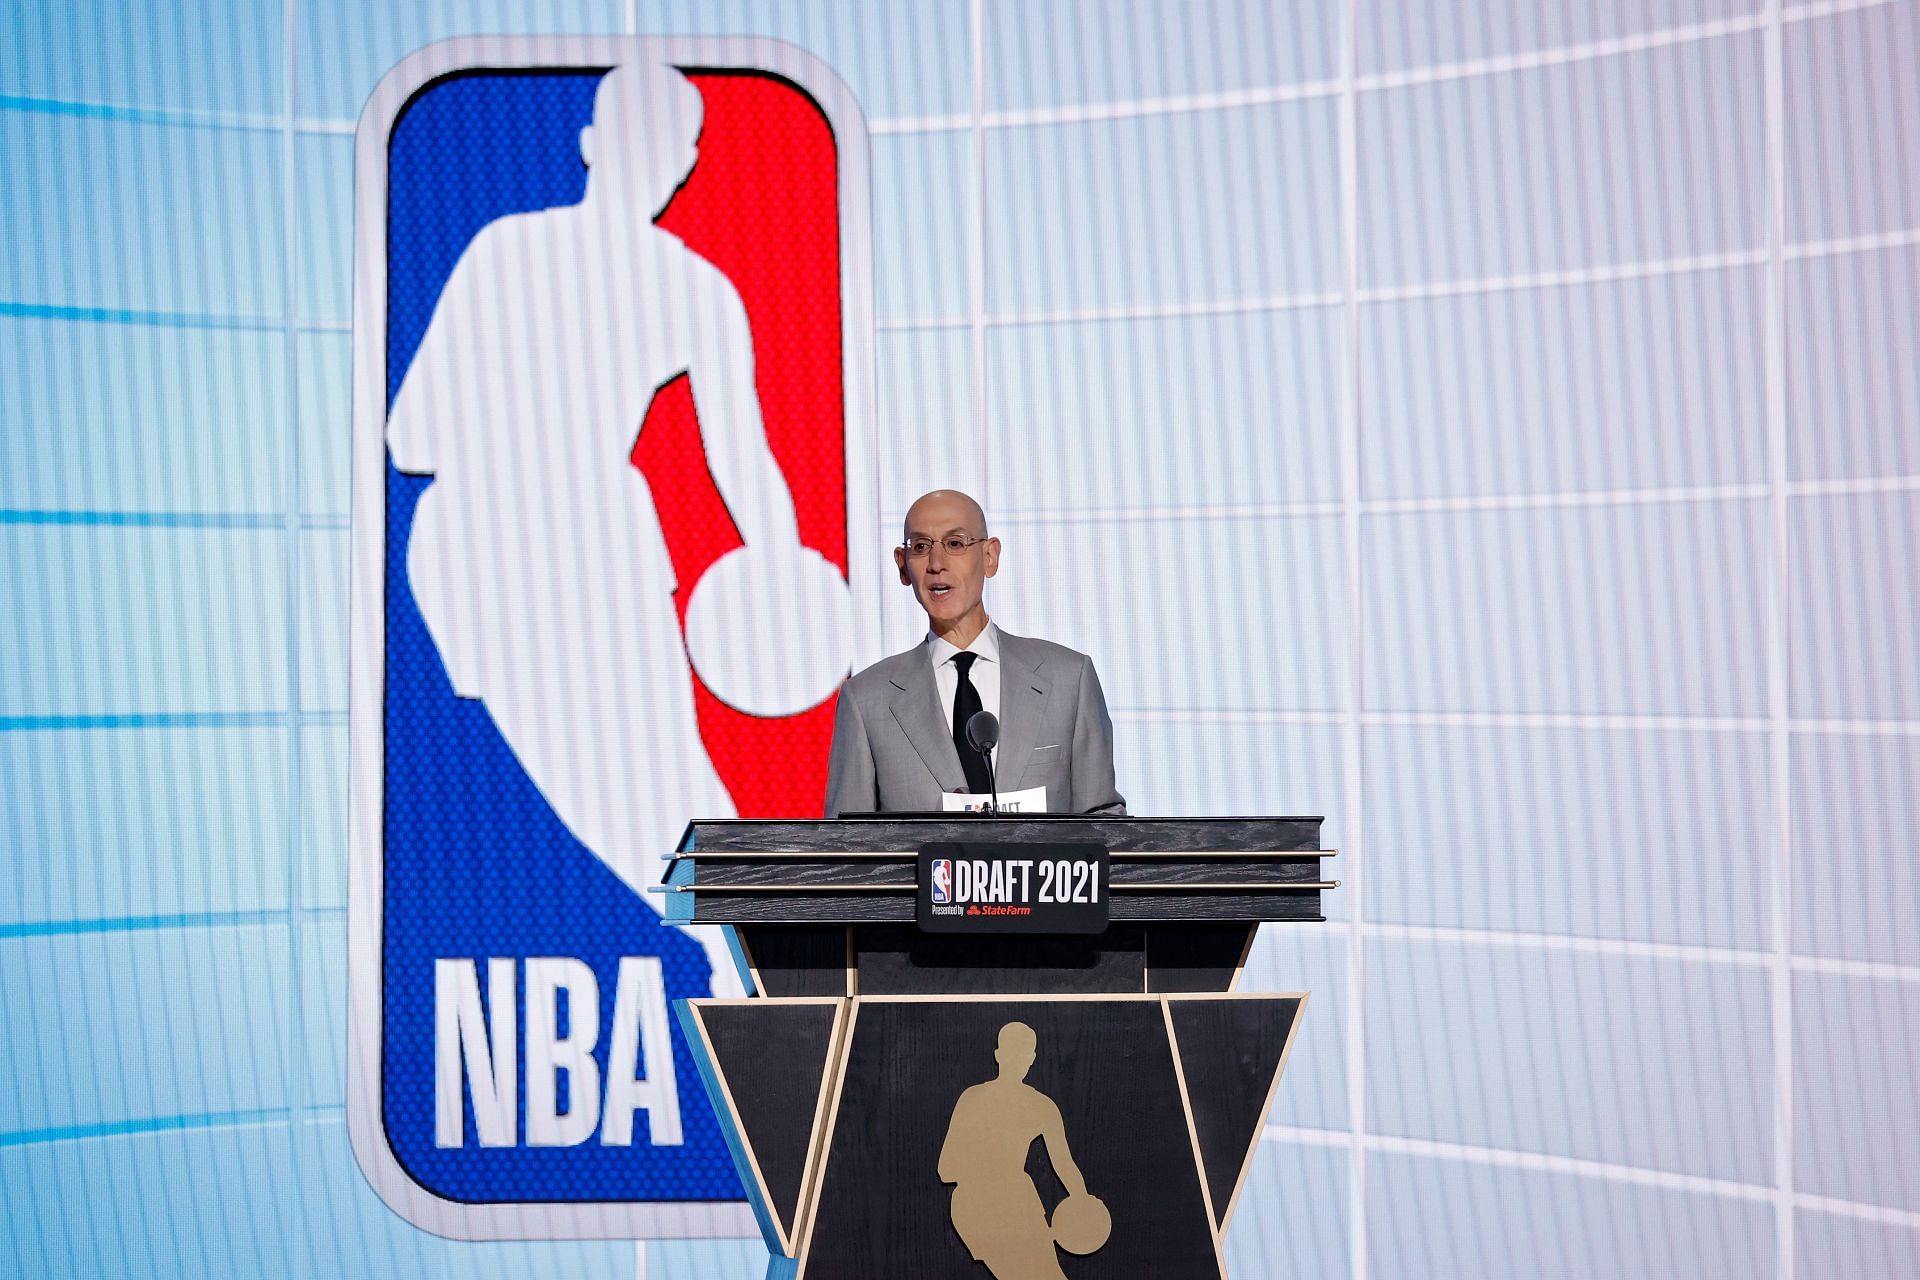 NBA Commissioner Adam Silver speaks during the 2021 NBA Draft.